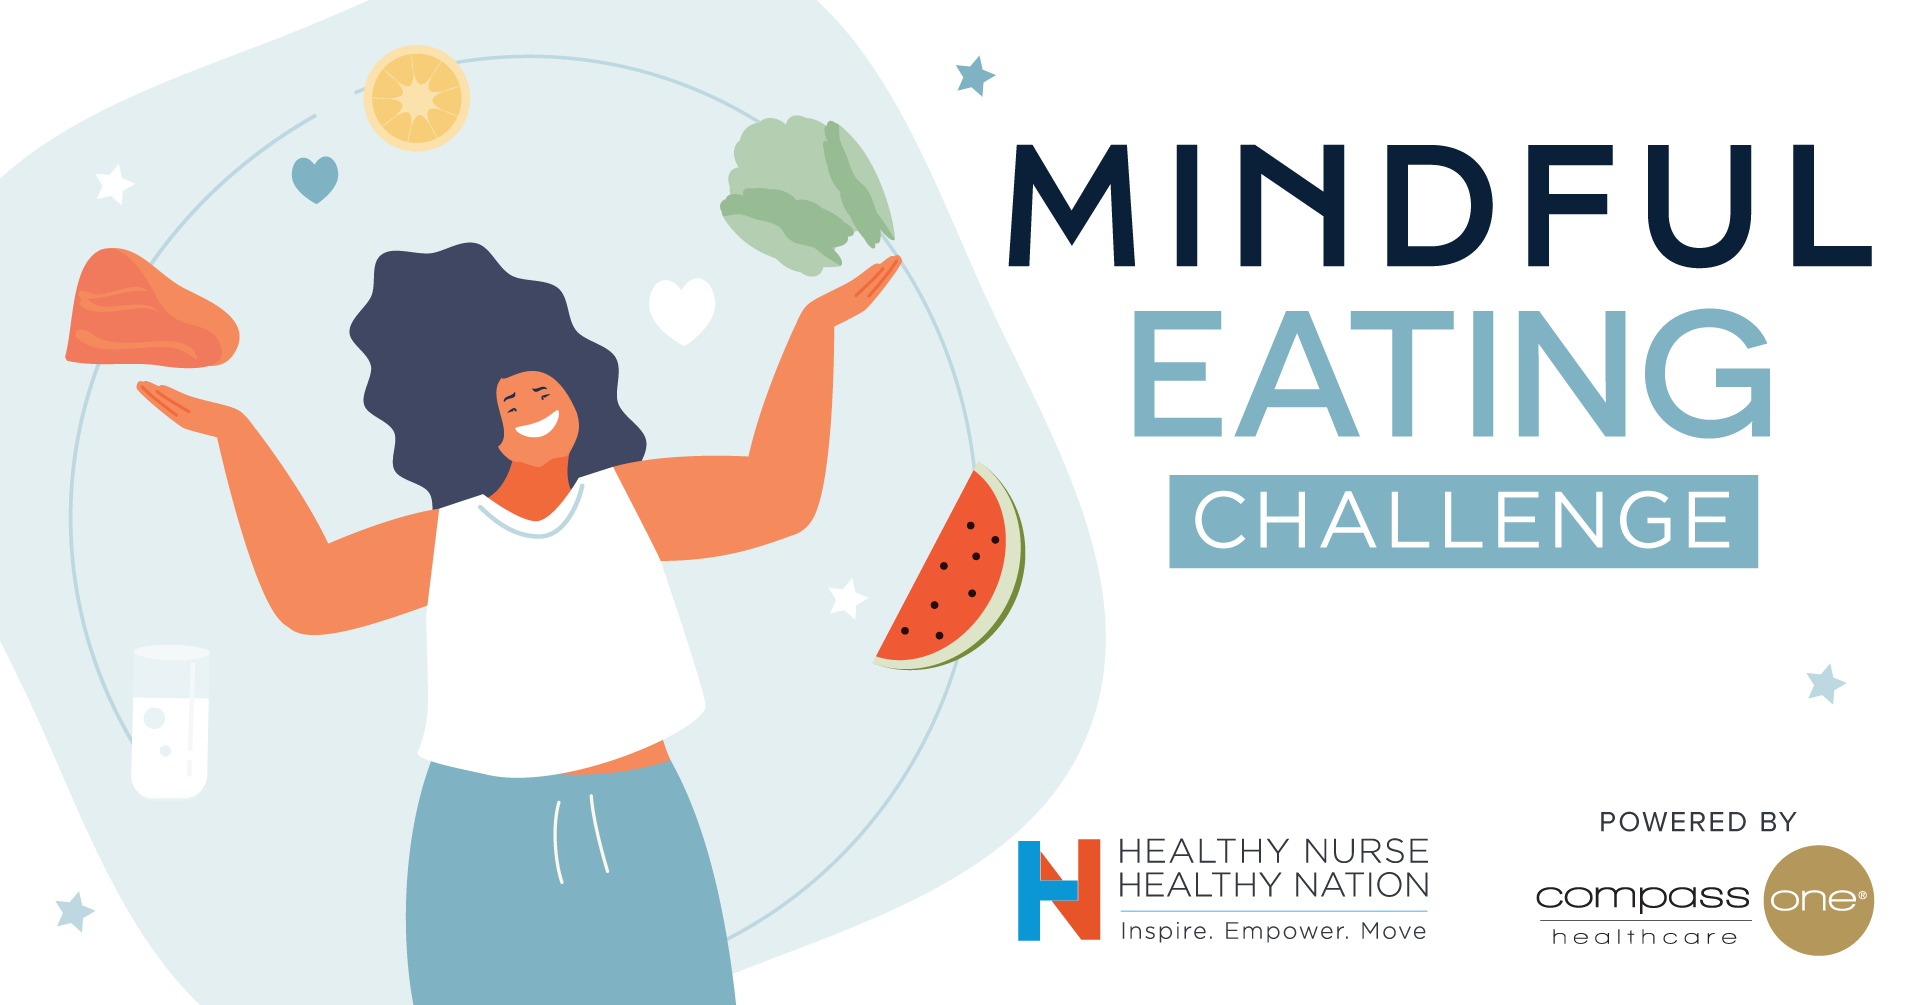 Ditch the Distractions - Mindful Eating, powered by Morrison Healthcare, a Division of Compass One Healthcare - Day 6 Tip 4687